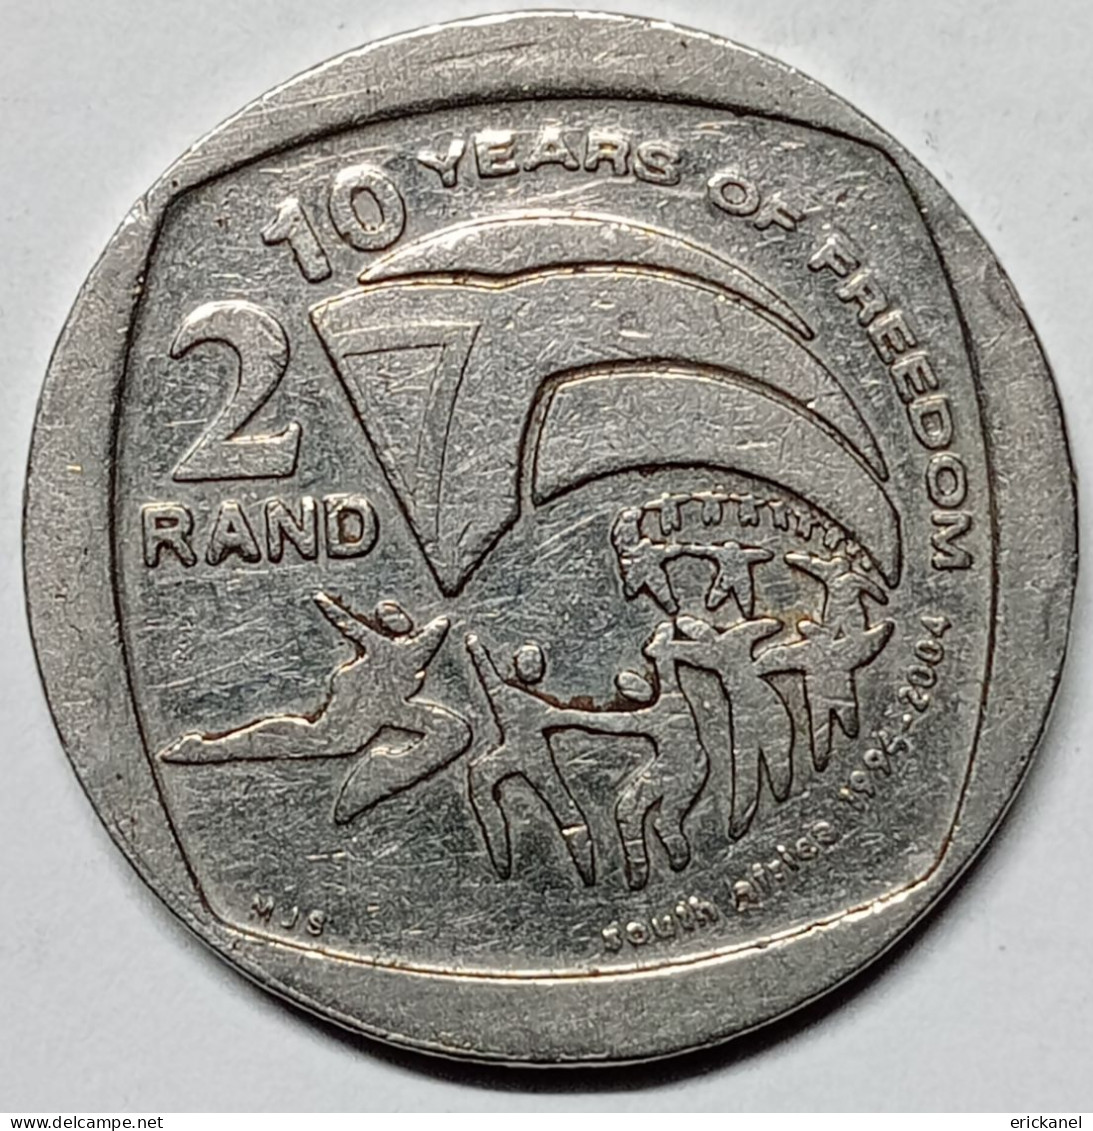 2004 South Africa, 2 Rand, 10 Years Of Freedom - Circulated - South Africa